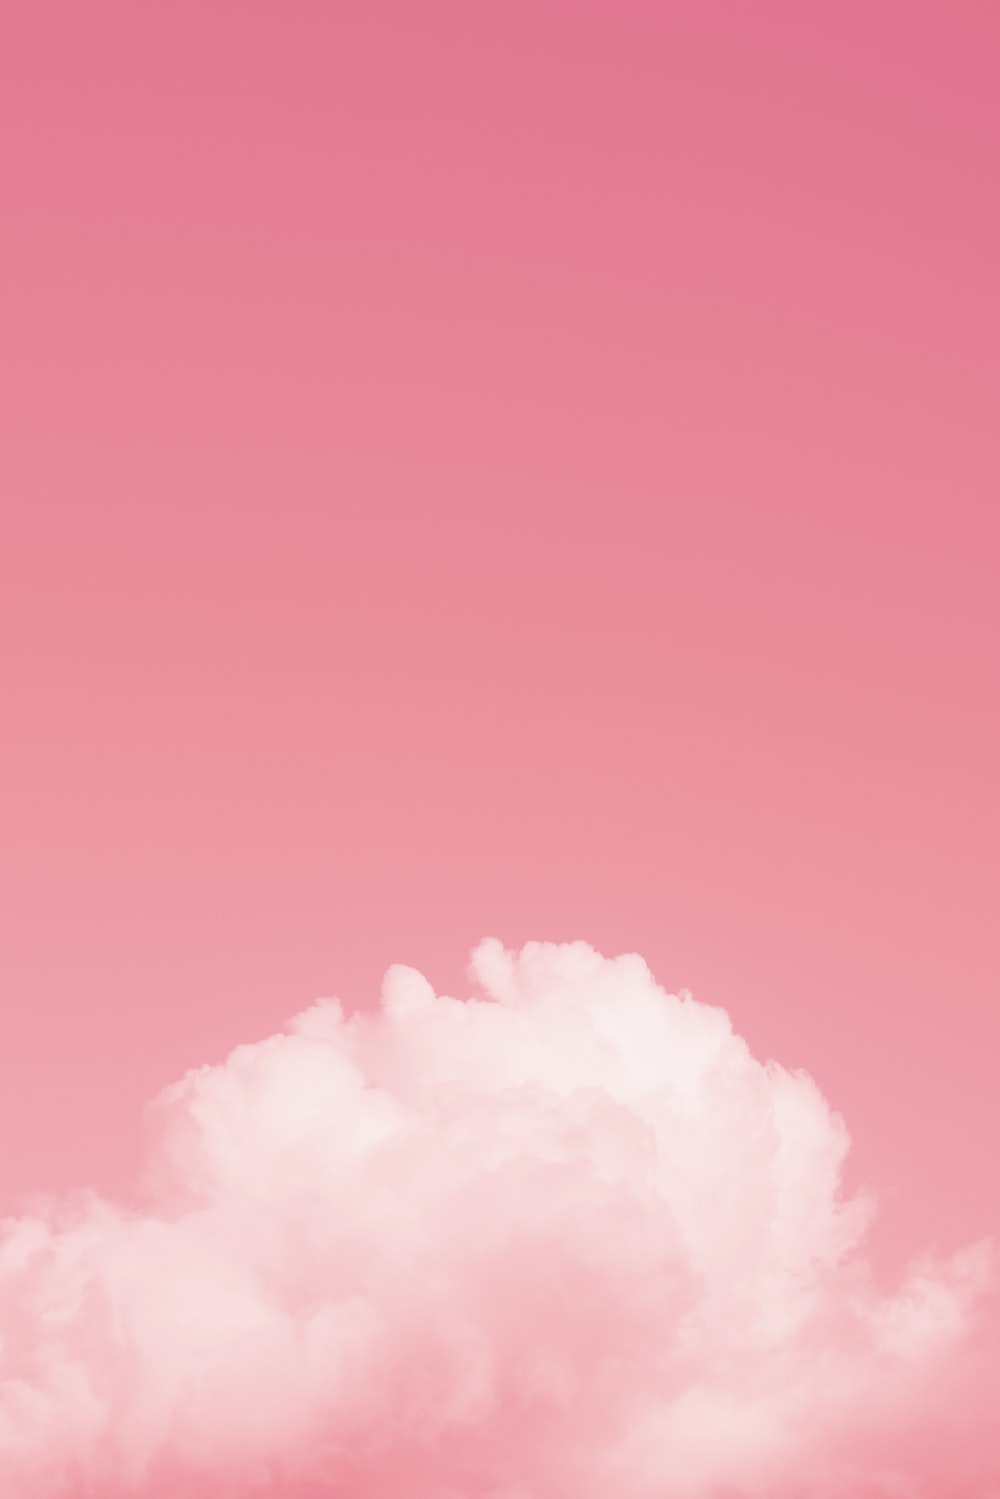 Pink Aesthetic Picture. Download Free Image